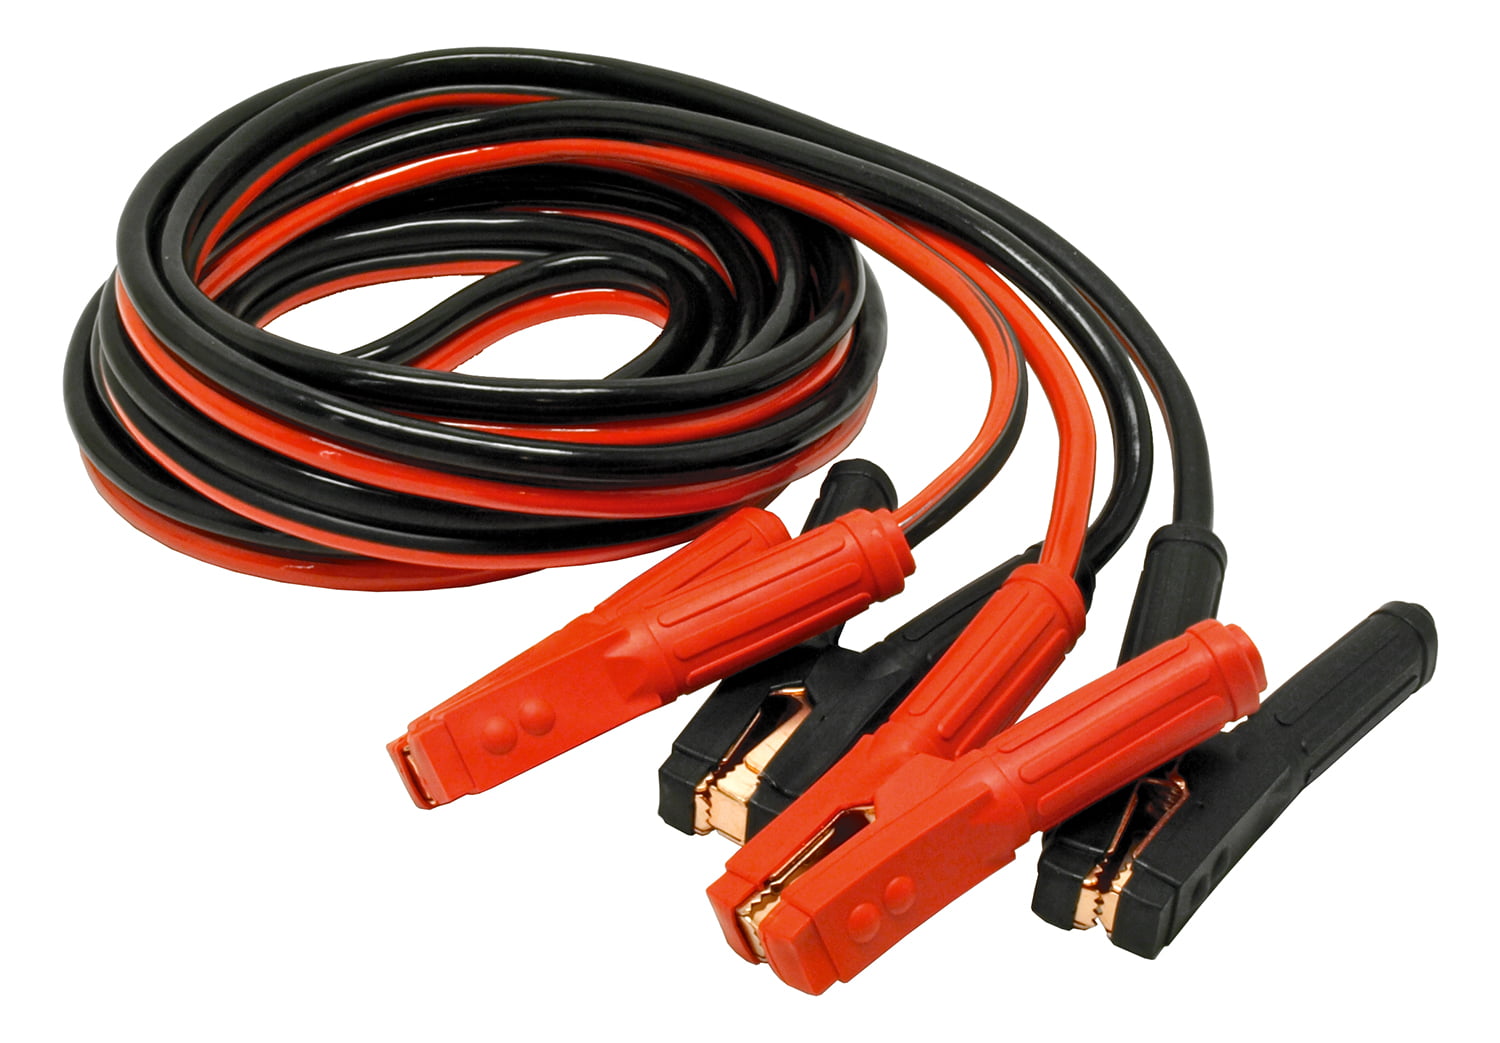 Stark 25 Heavy-Duty Battery Booster Jumper Cables 21515-H1, 59% OFF